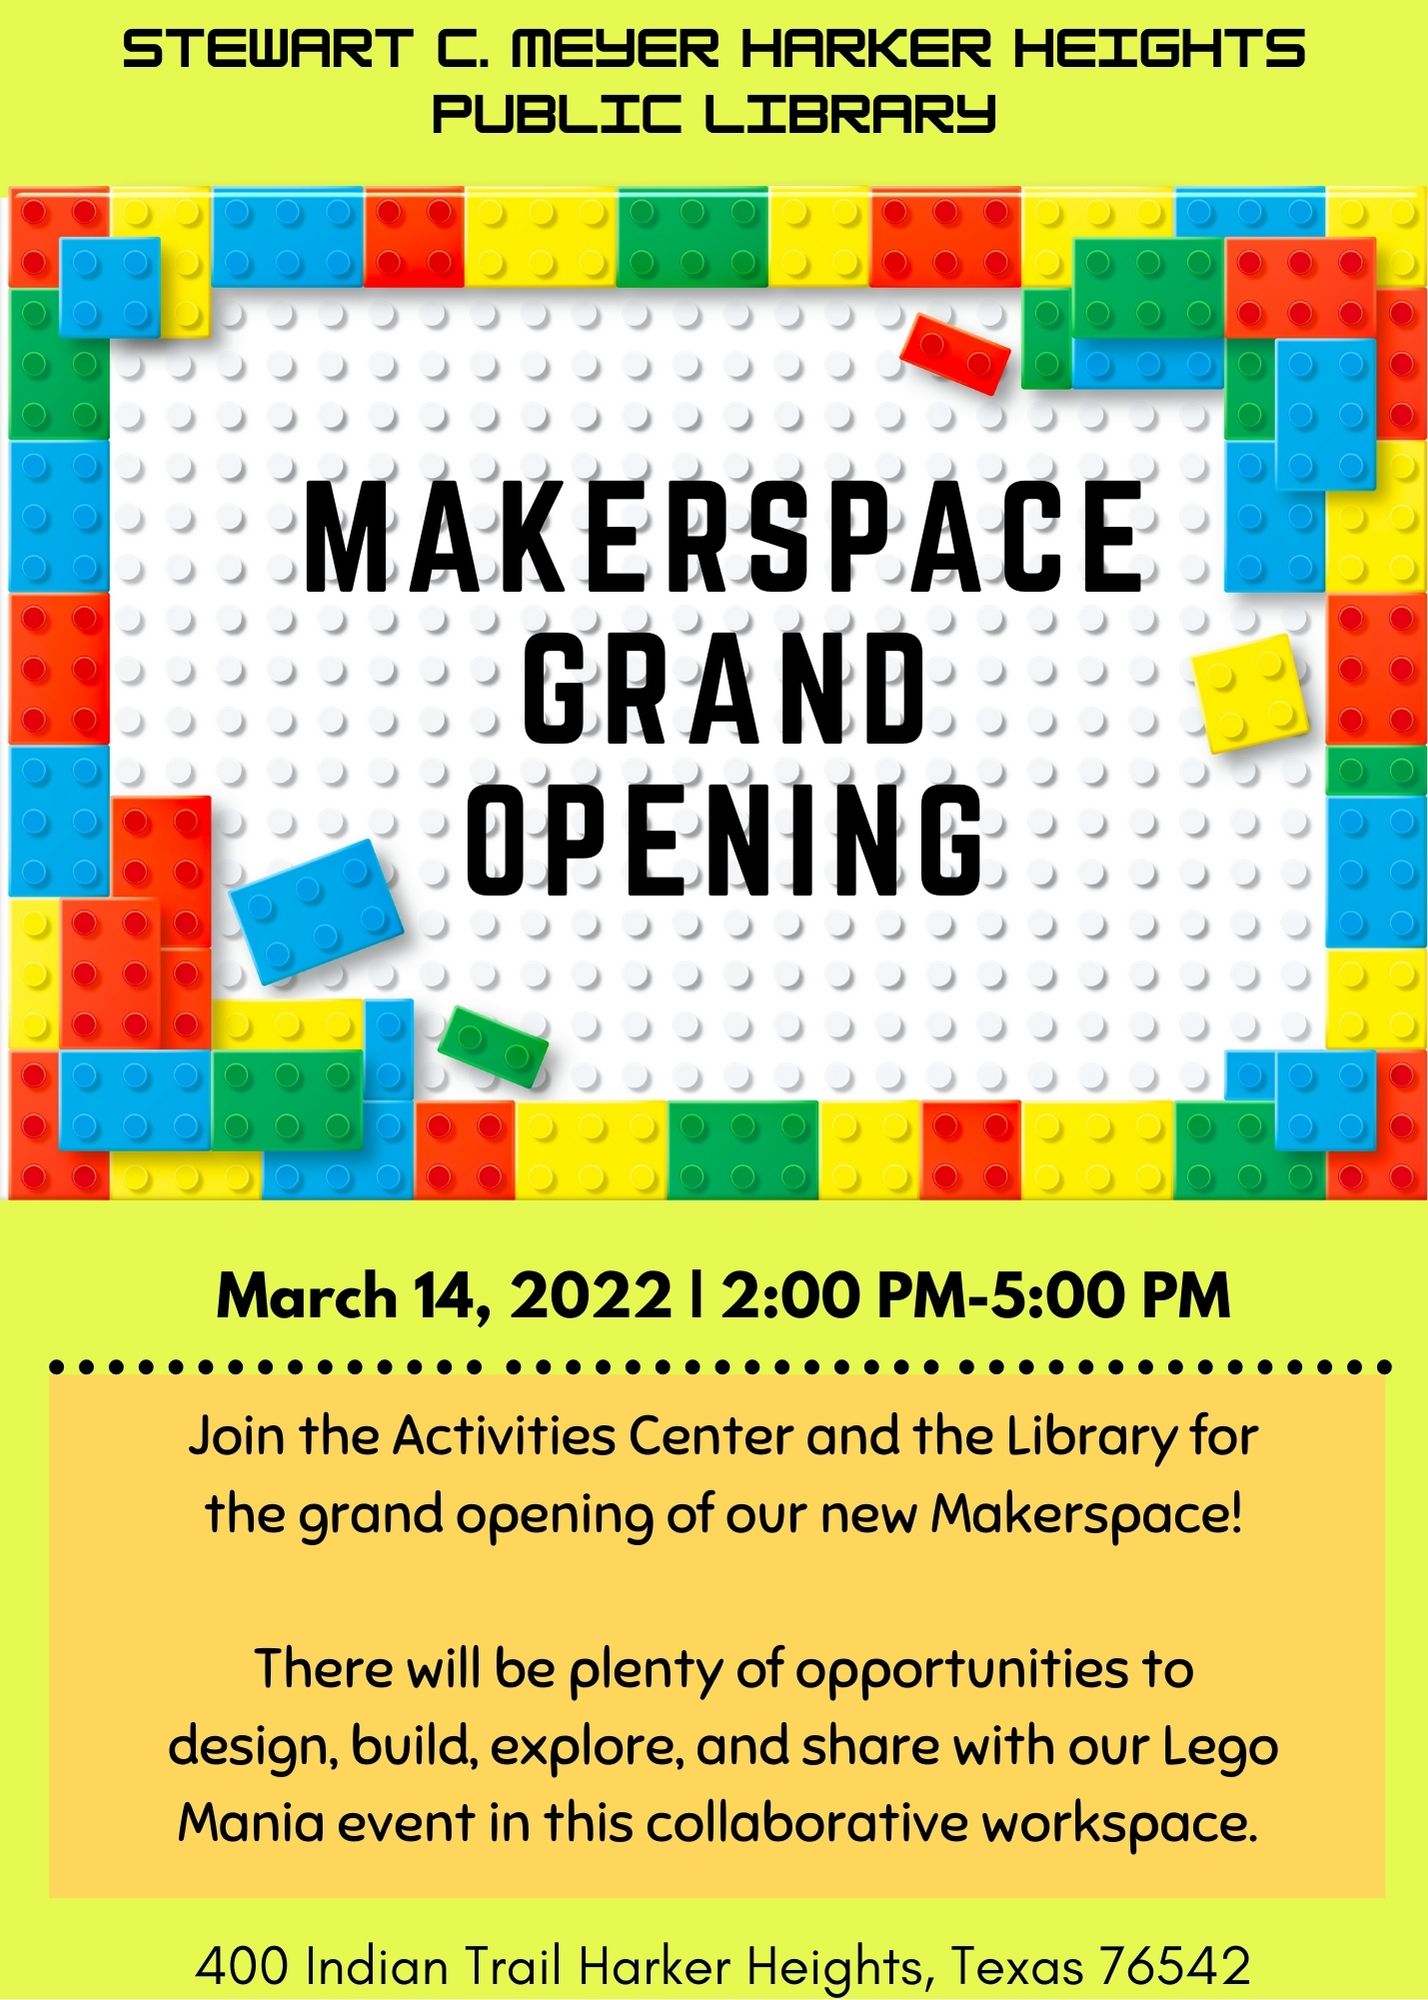 MakerSpace Grand Opening 03.14.22